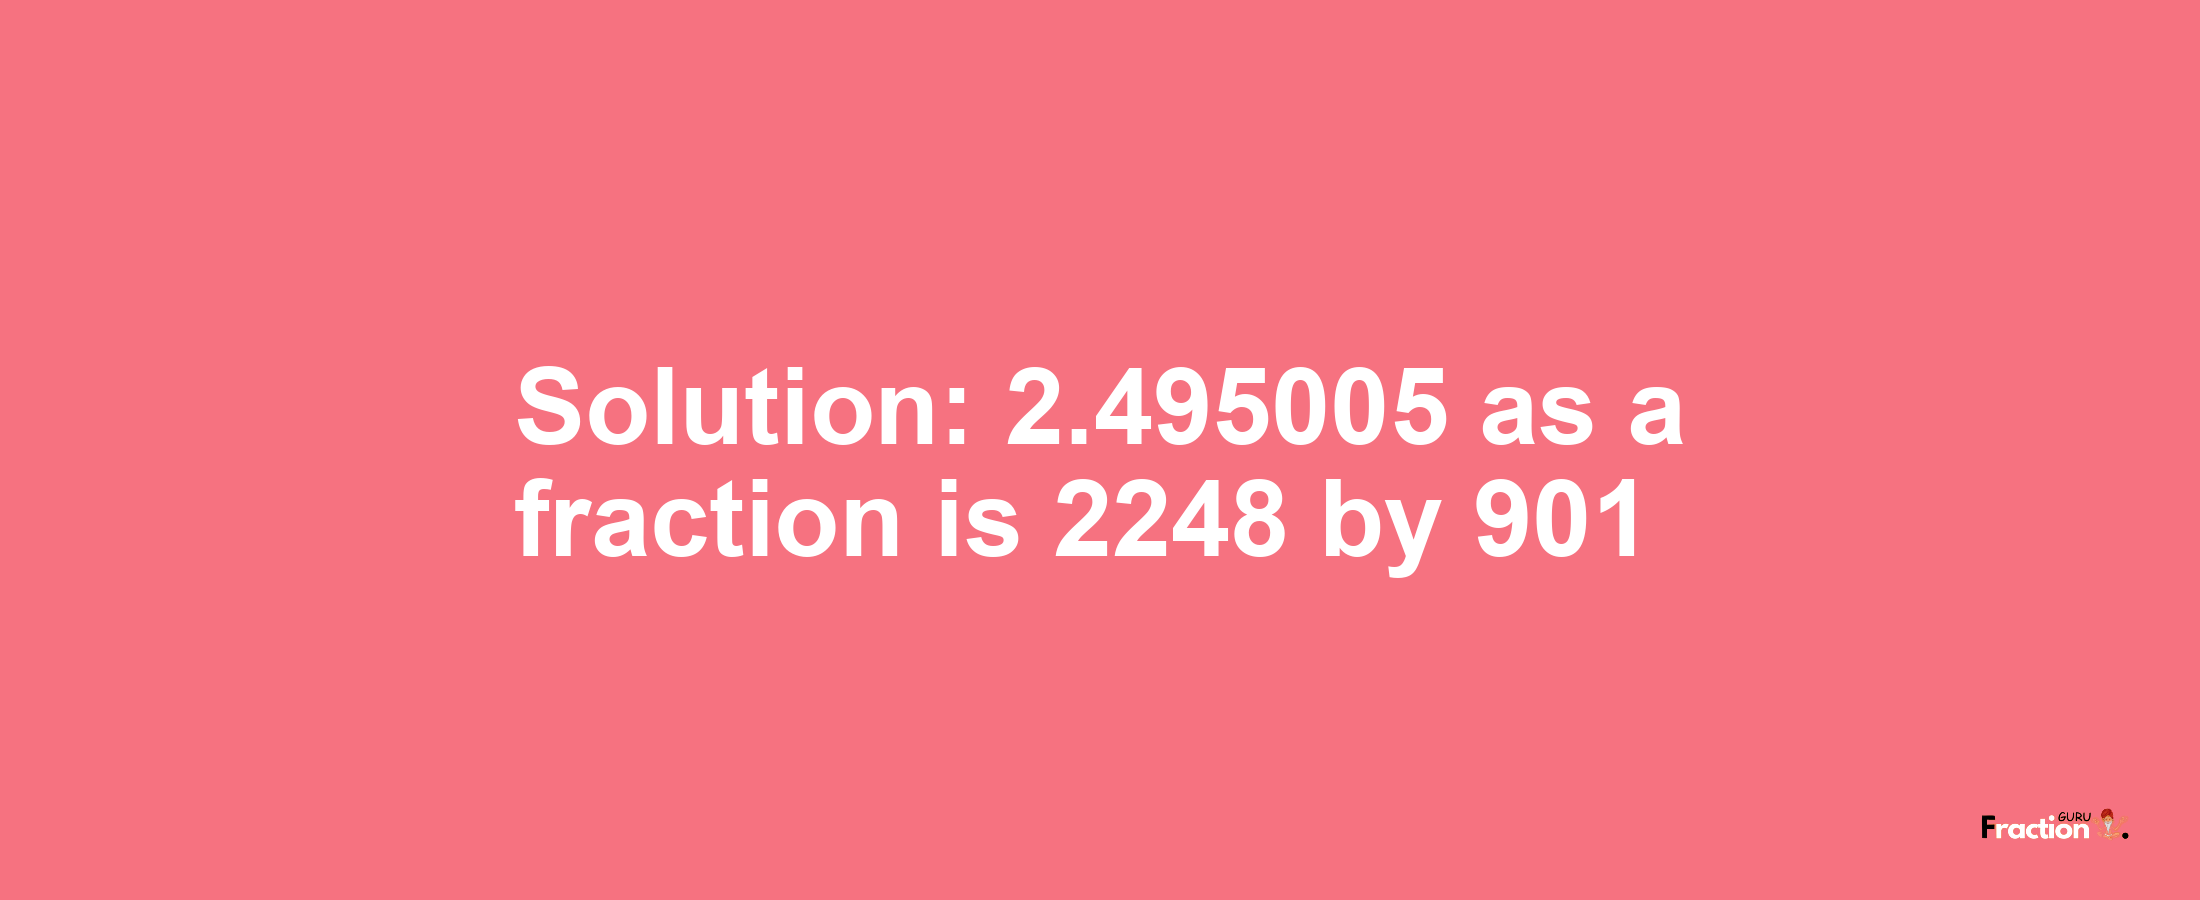 Solution:2.495005 as a fraction is 2248/901